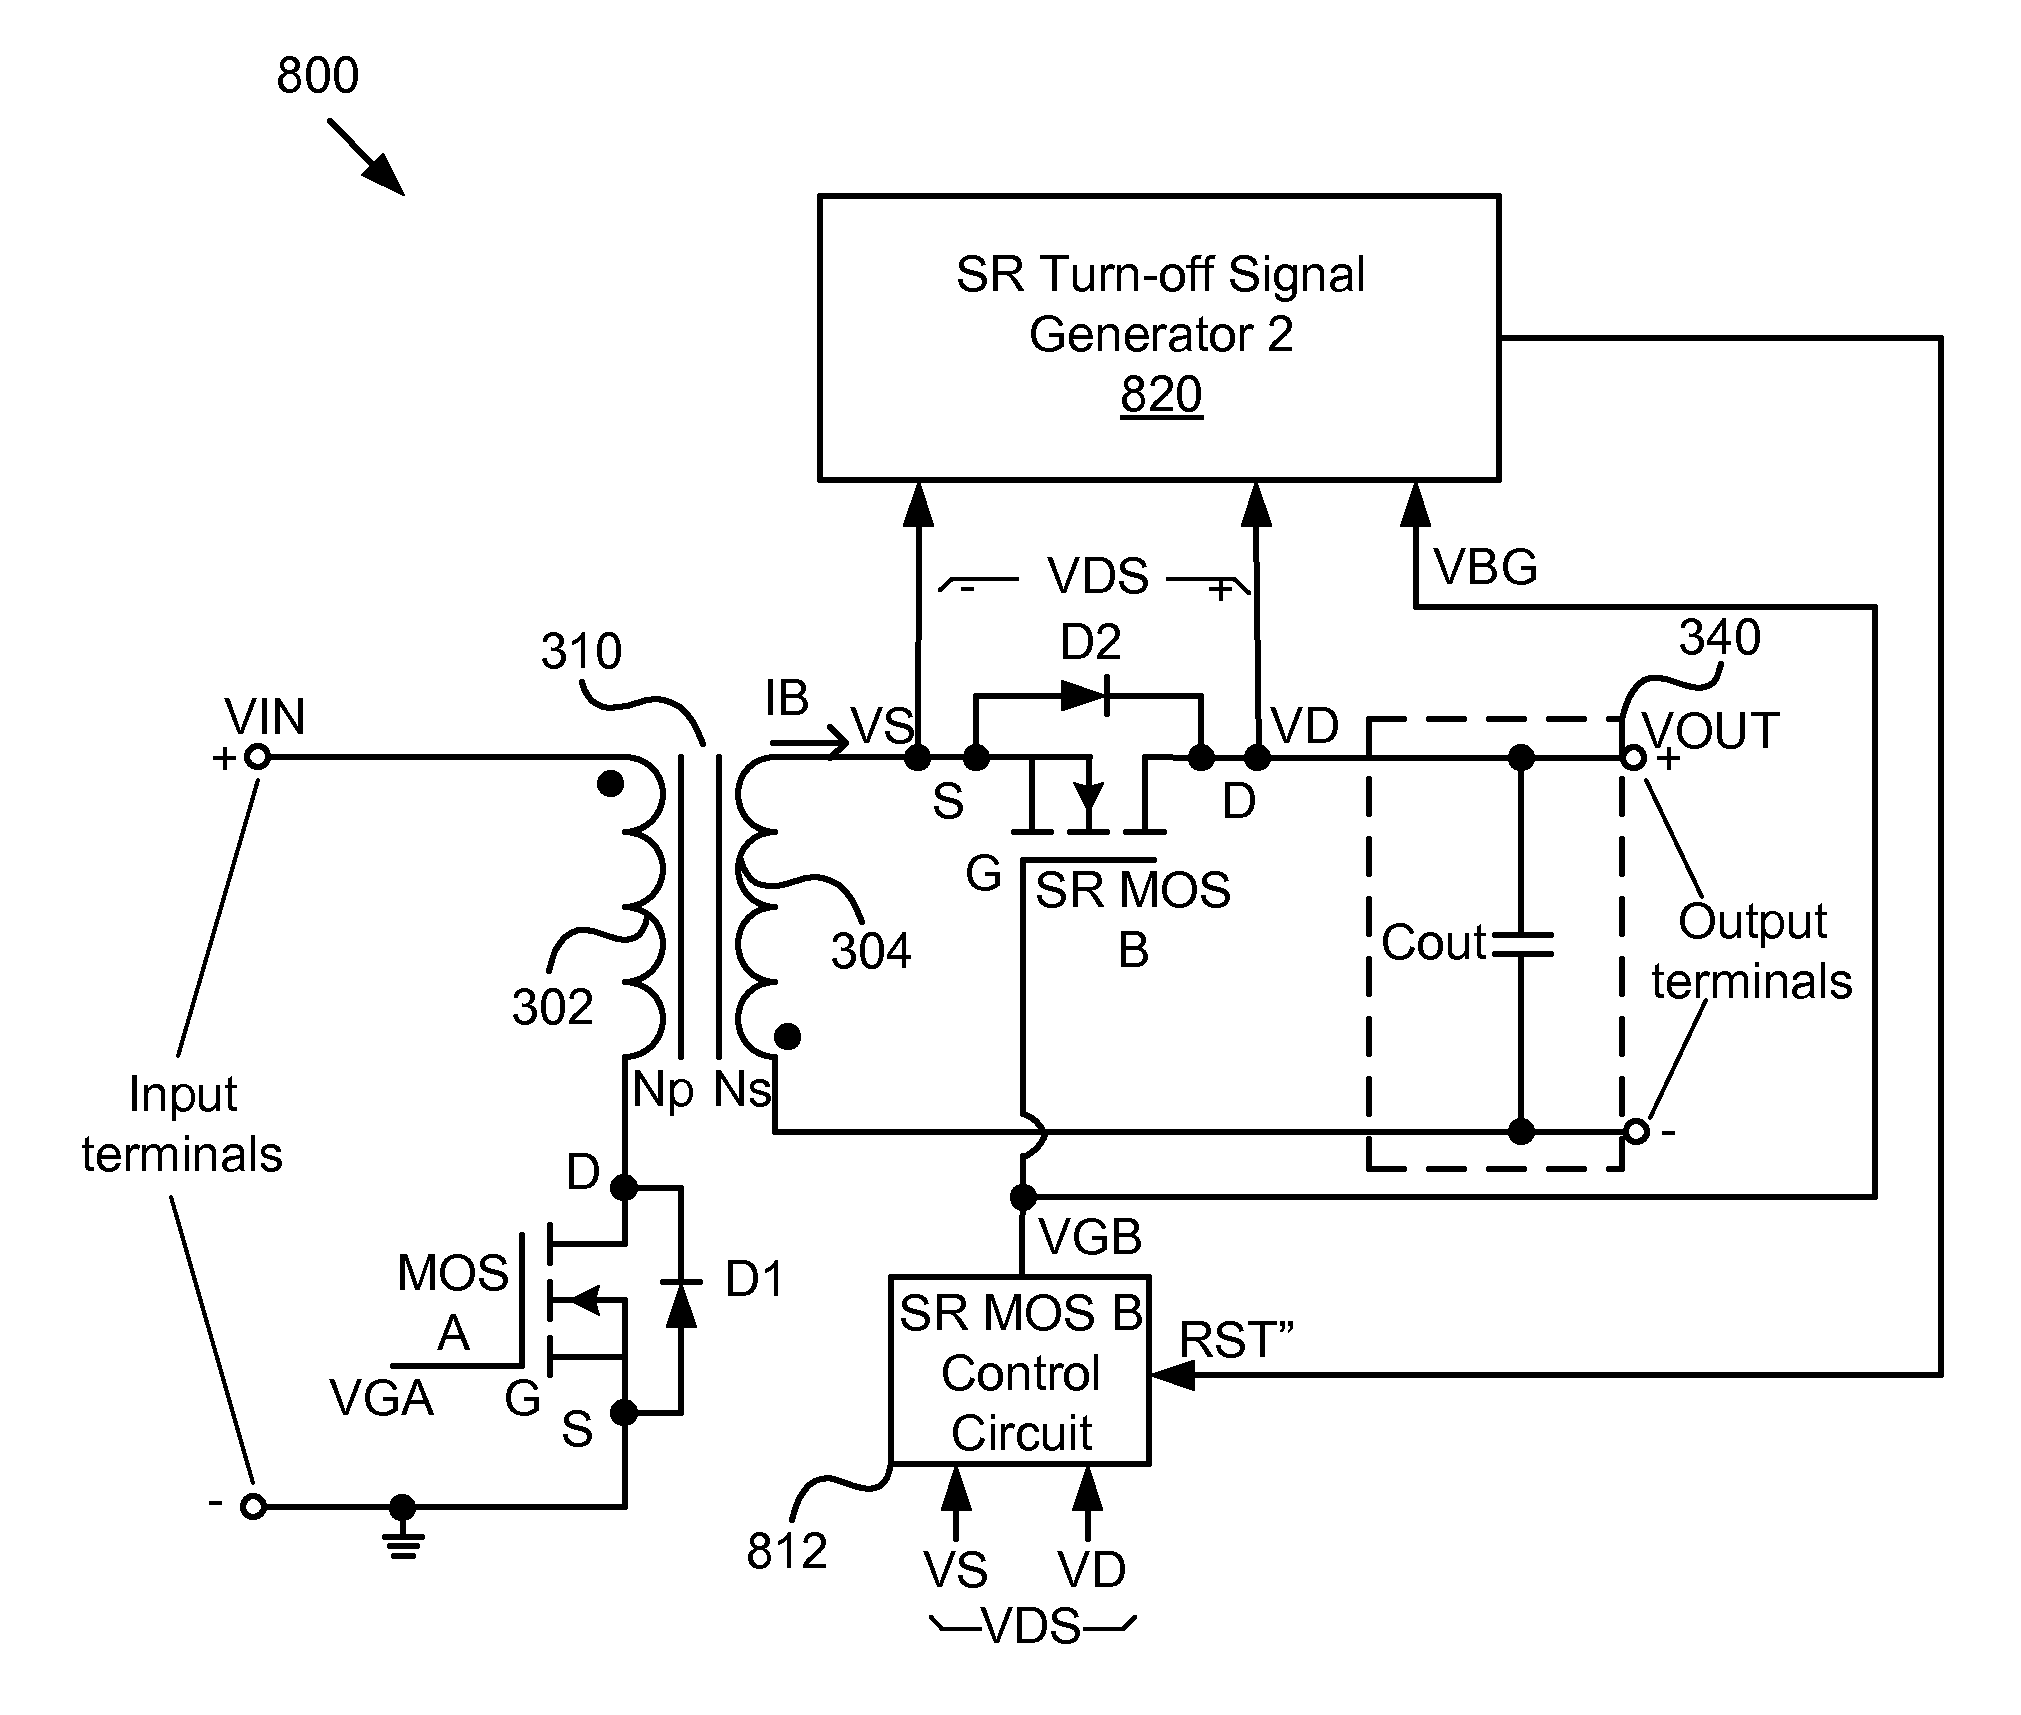 Body diode conduction optimization in mosfet synchronous rectifier